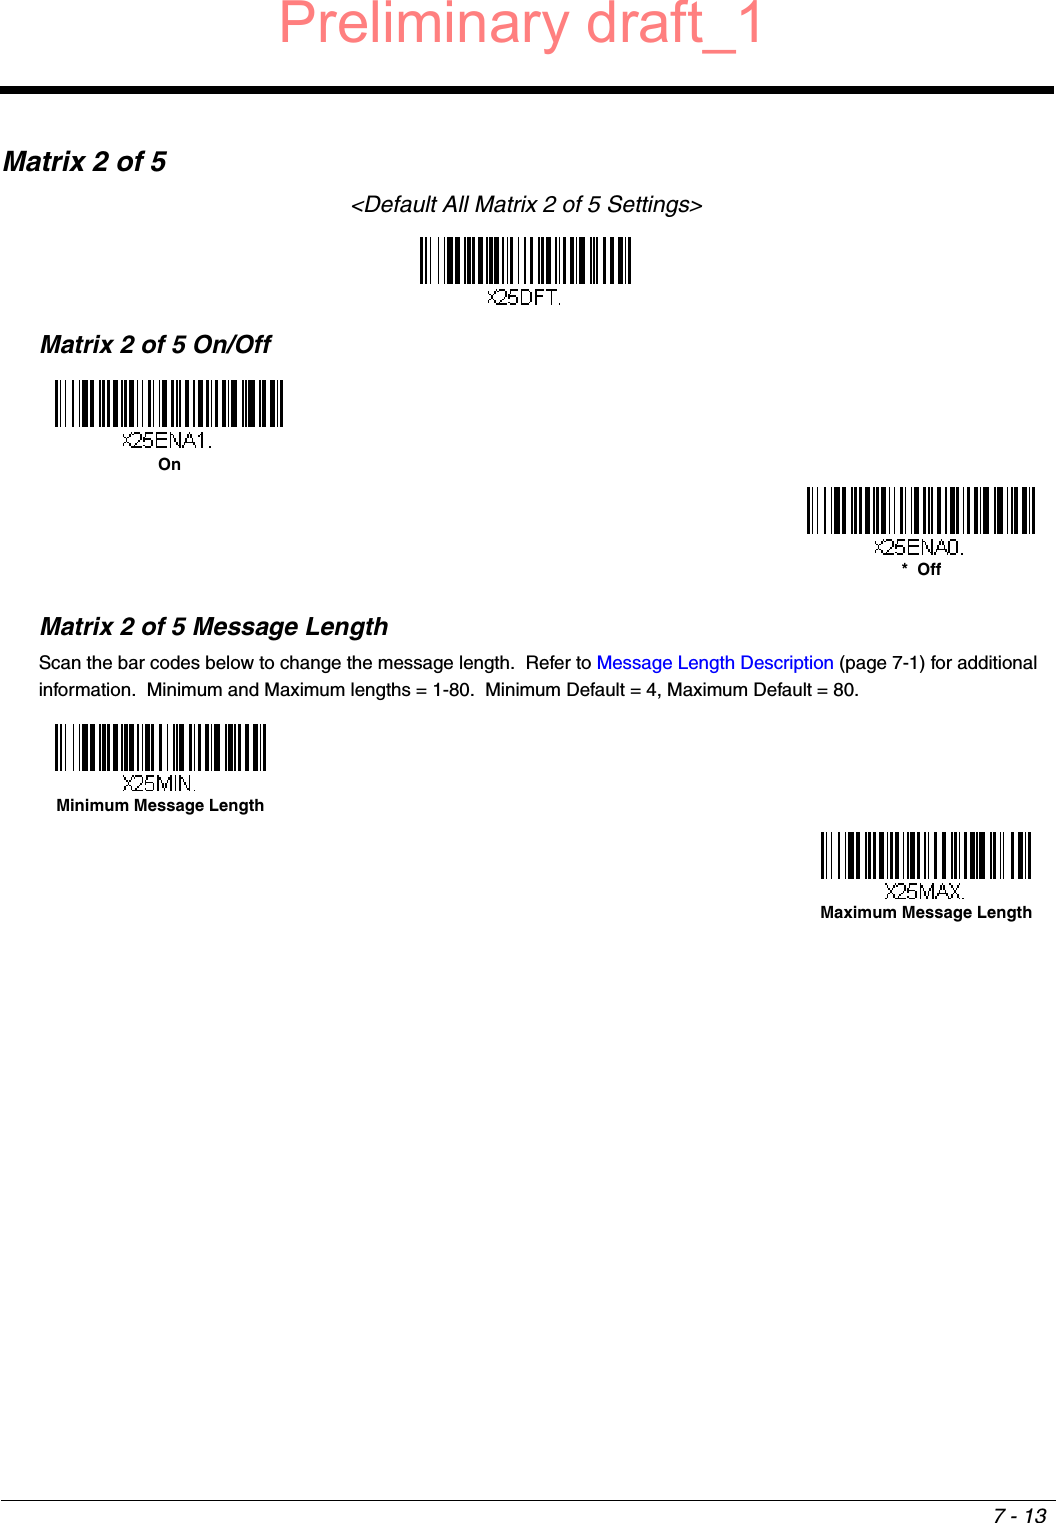 7 - 13Matrix 2 of 5&lt;Default All Matrix 2 of 5 Settings&gt;Matrix 2 of 5 On/OffMatrix 2 of 5 Message LengthScan the bar codes below to change the message length.  Refer to Message Length Description (page 7-1) for additional information.  Minimum and Maximum lengths = 1-80.  Minimum Default = 4, Maximum Default = 80.On*  OffMinimum Message LengthMaximum Message LengthPreliminary draft_1